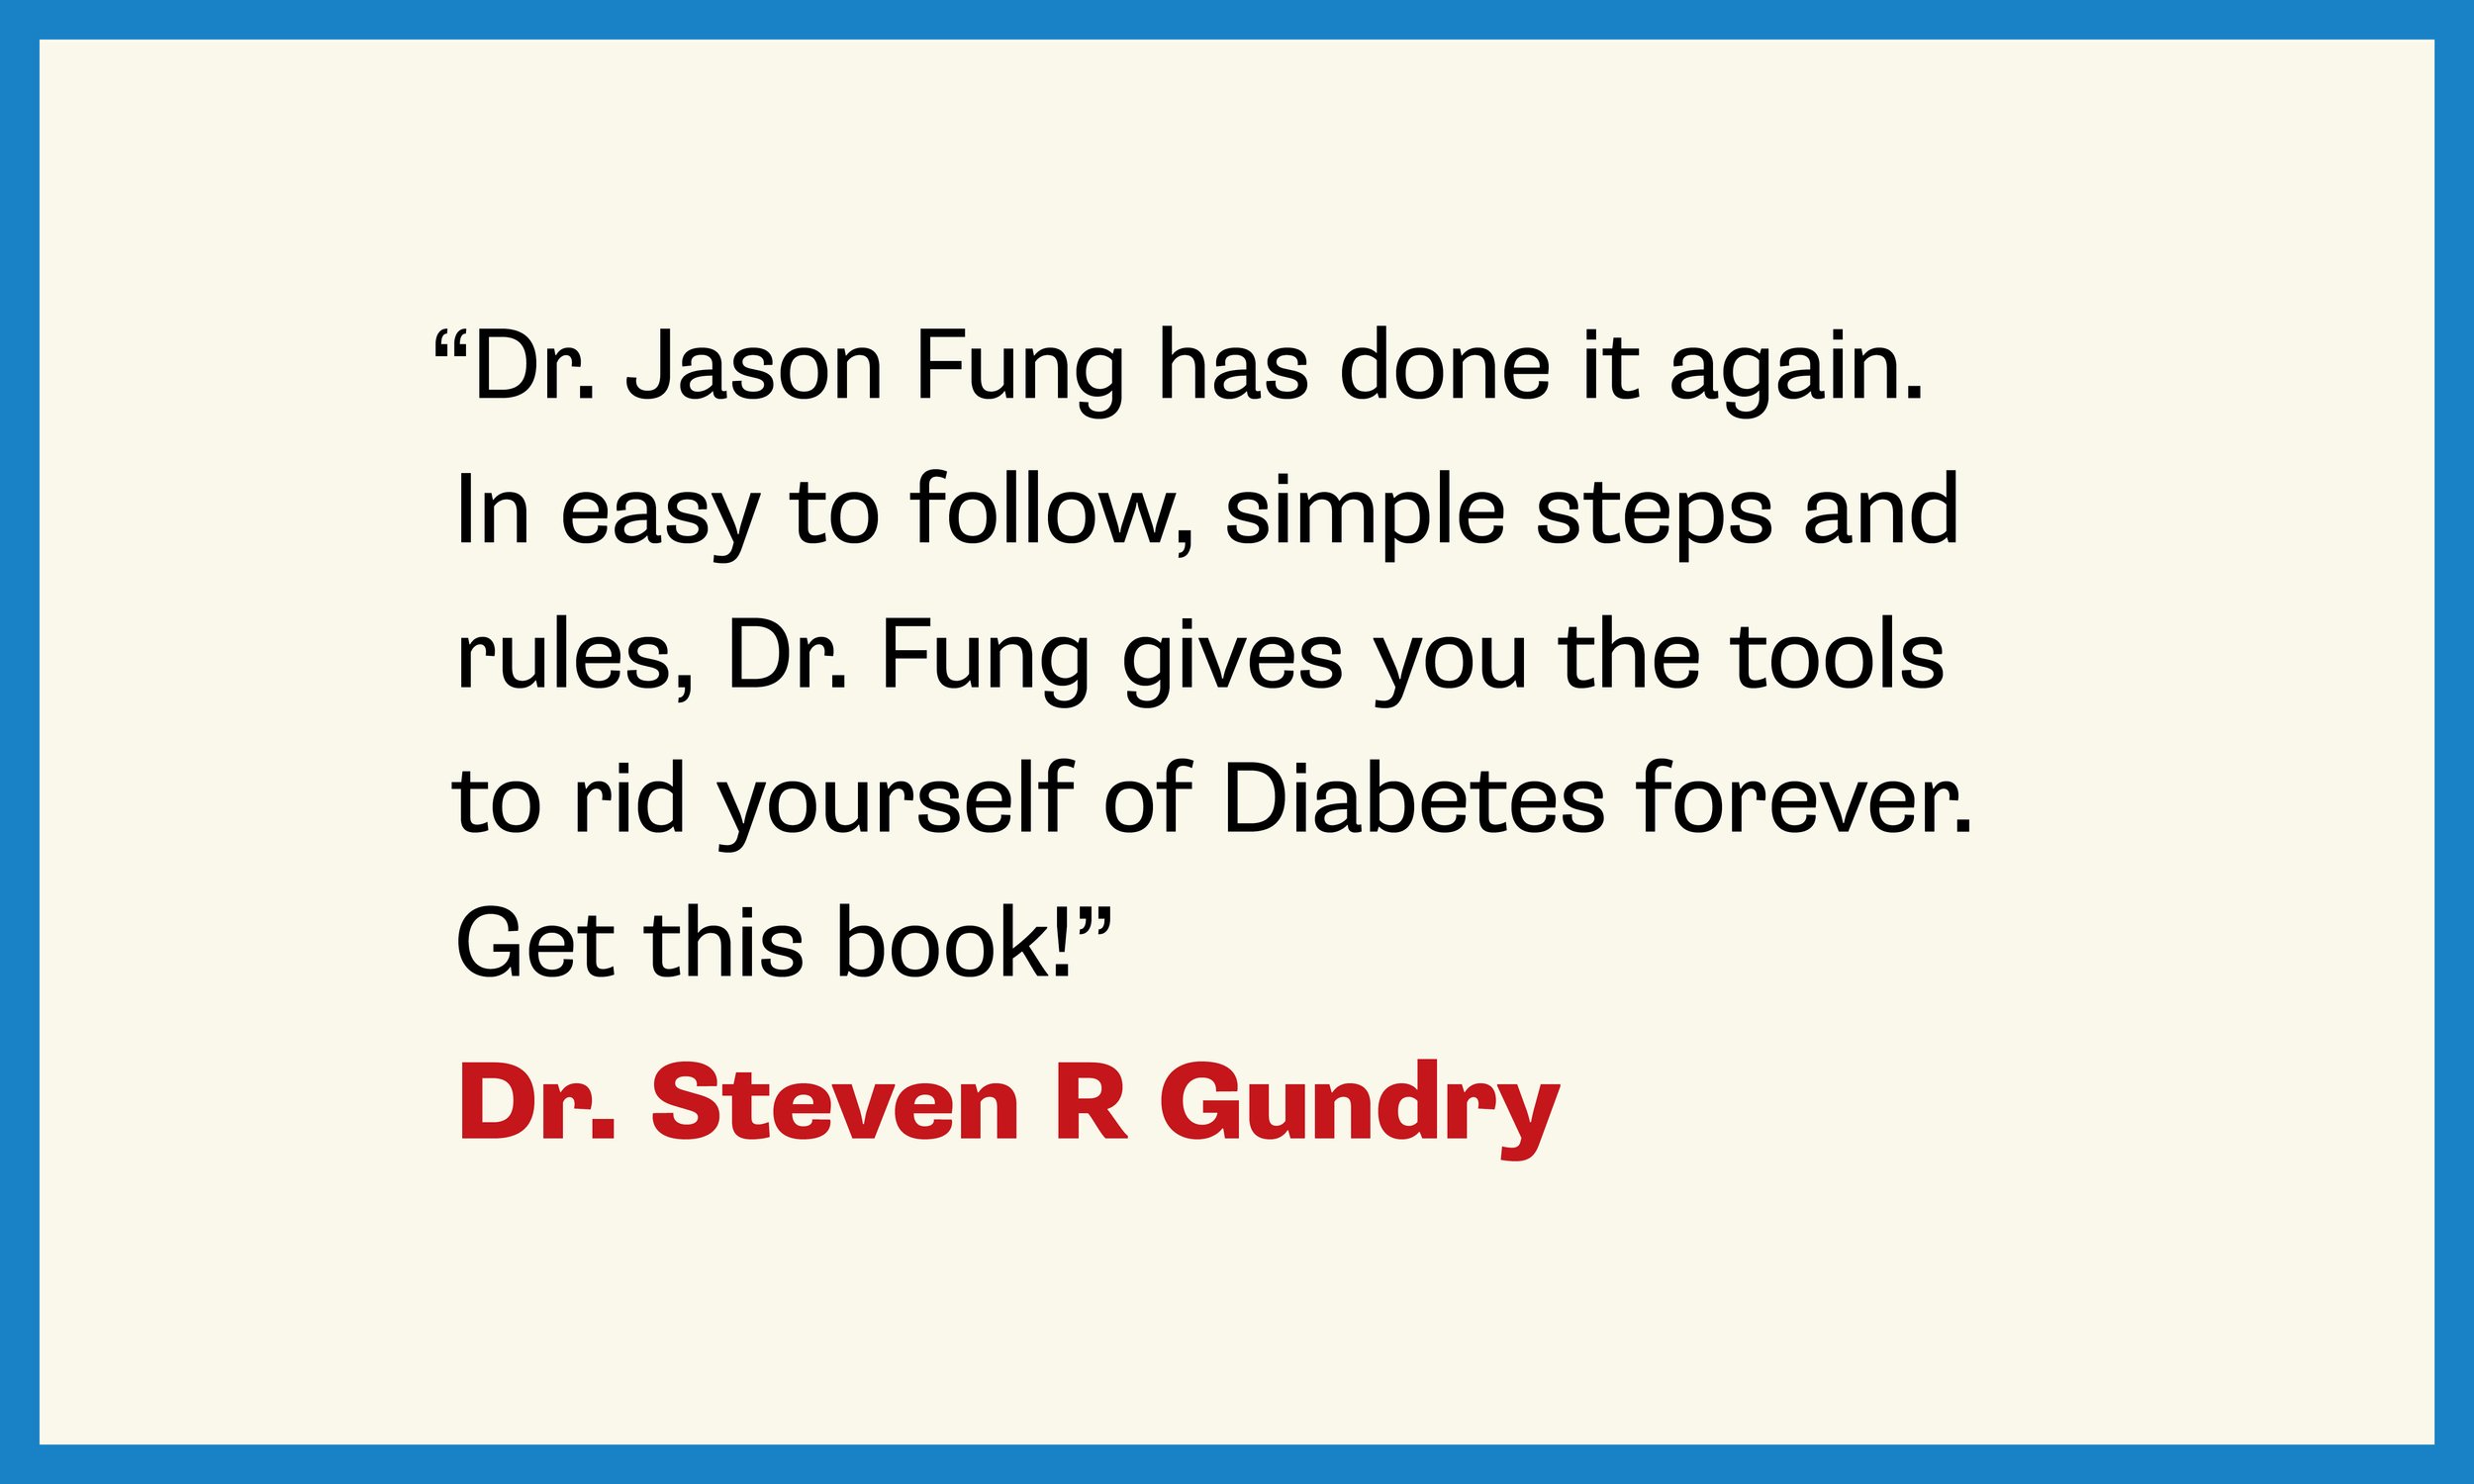 Dr. Jason Fung's Fasting Methods